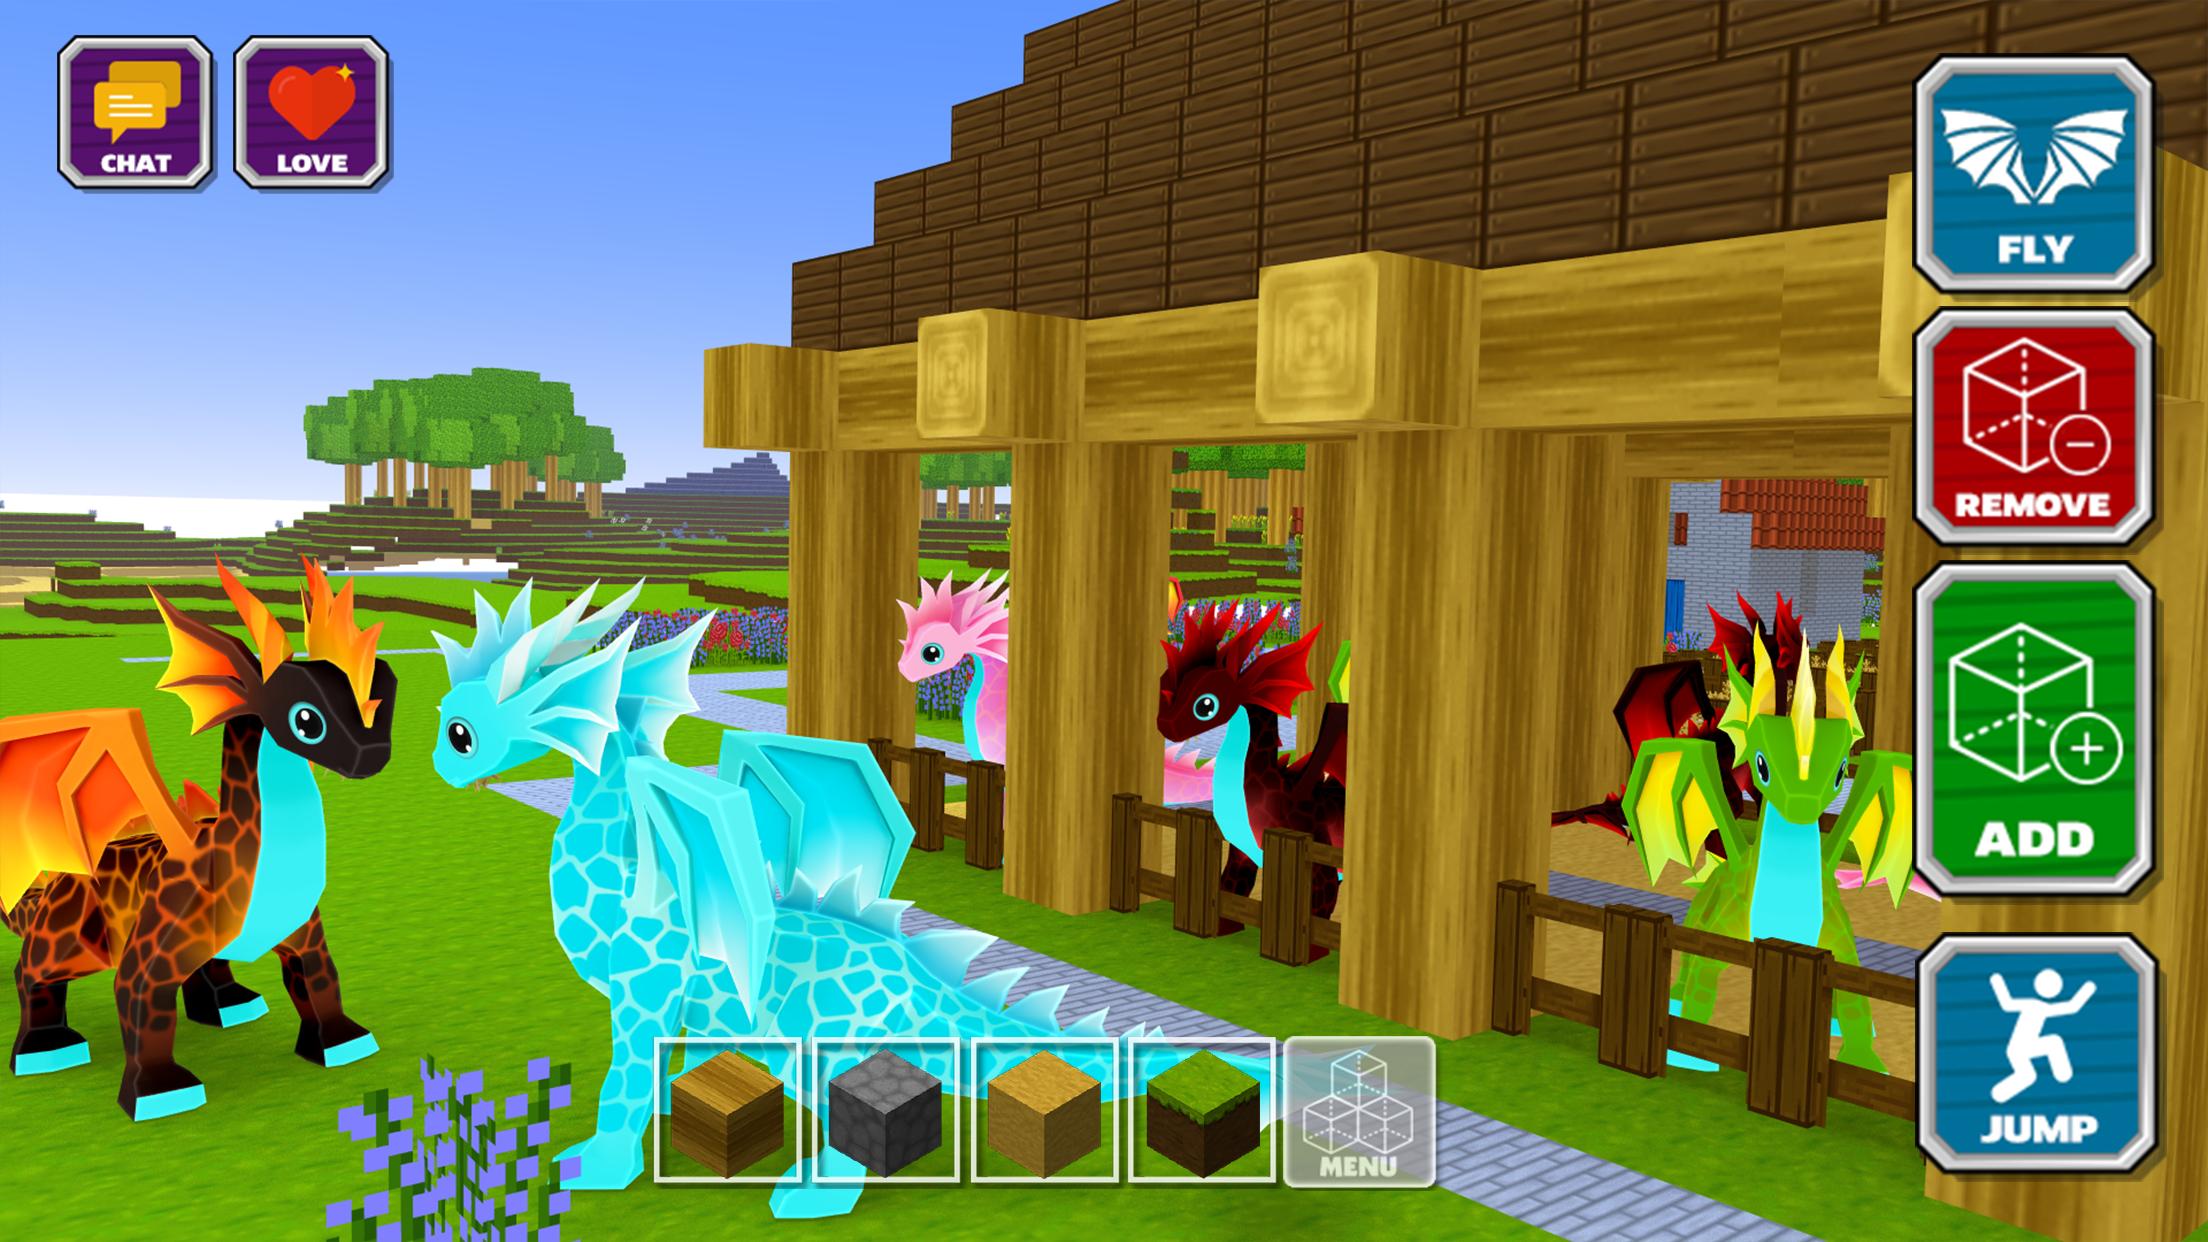 Dragon Craft for Android - APK Download - 